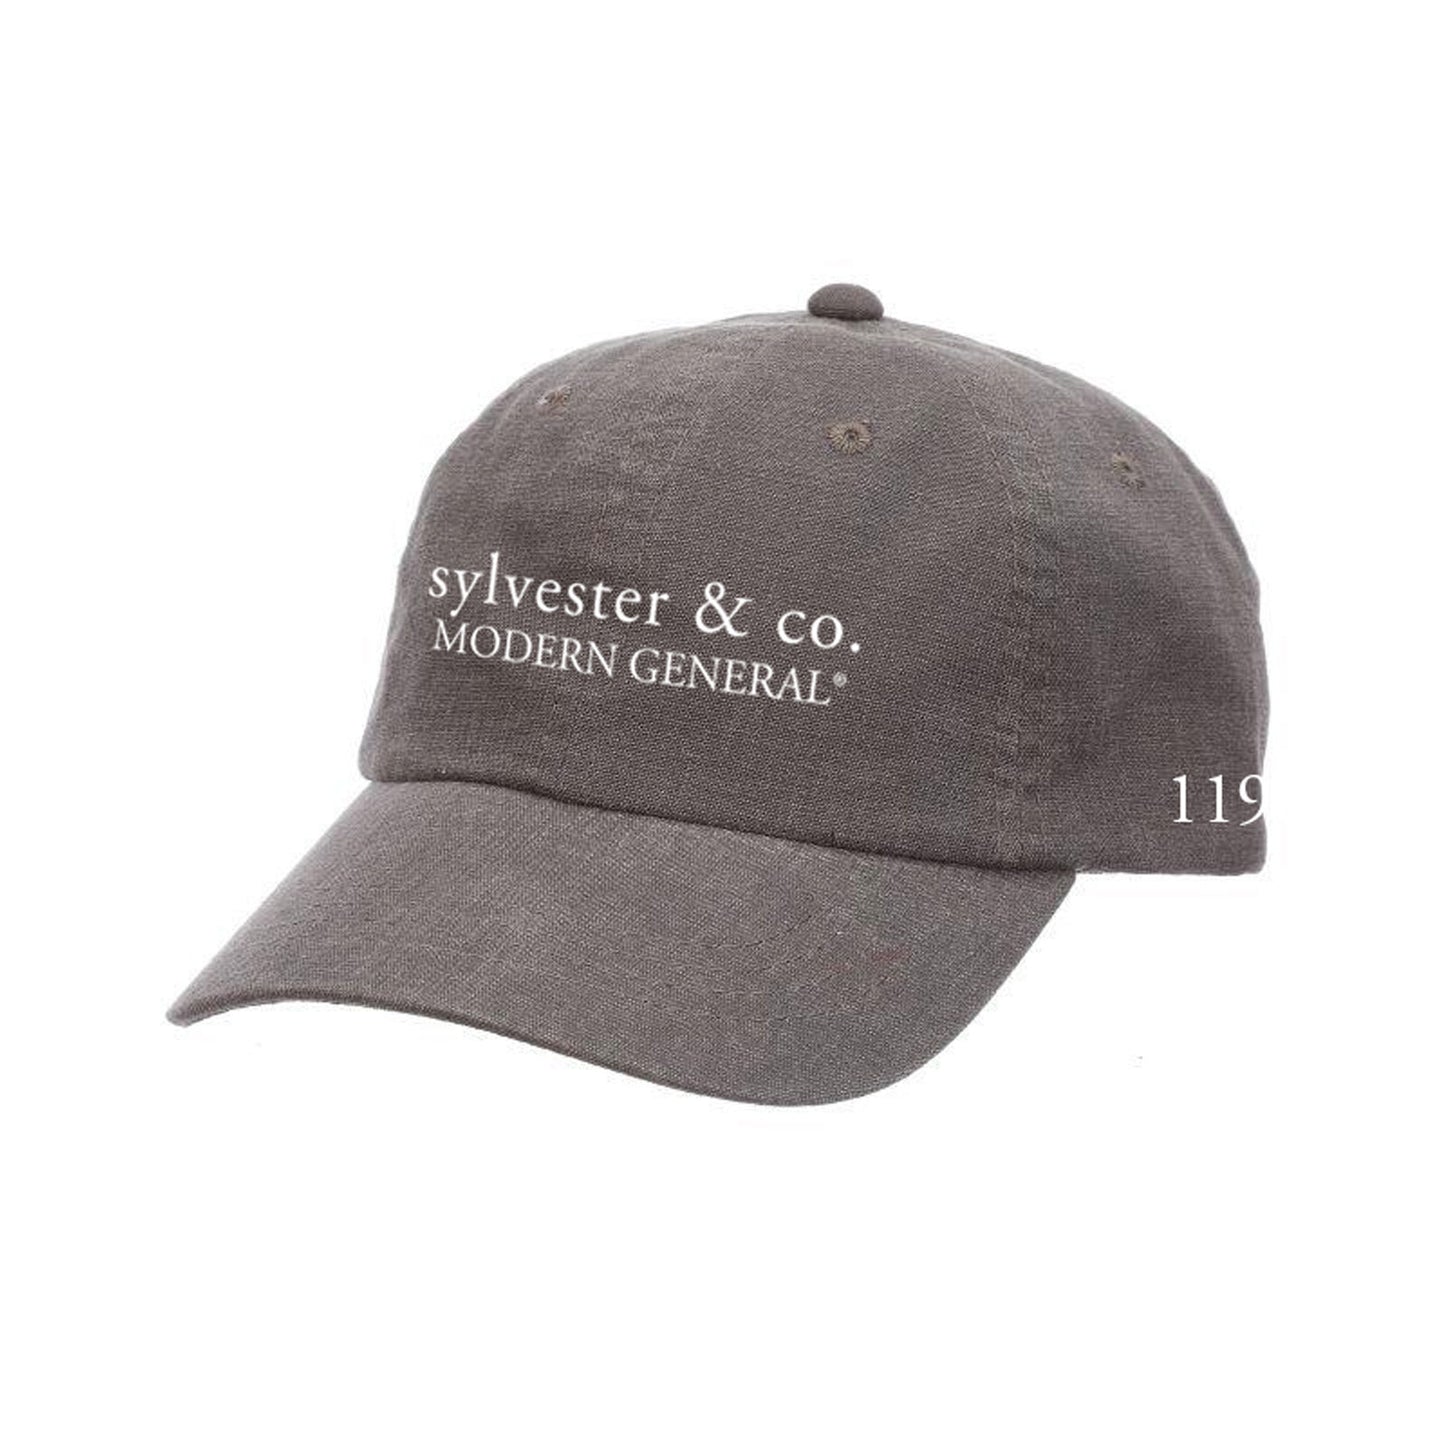 Sylvester & Co. Modern General® Signature Cap in Washed Canvas